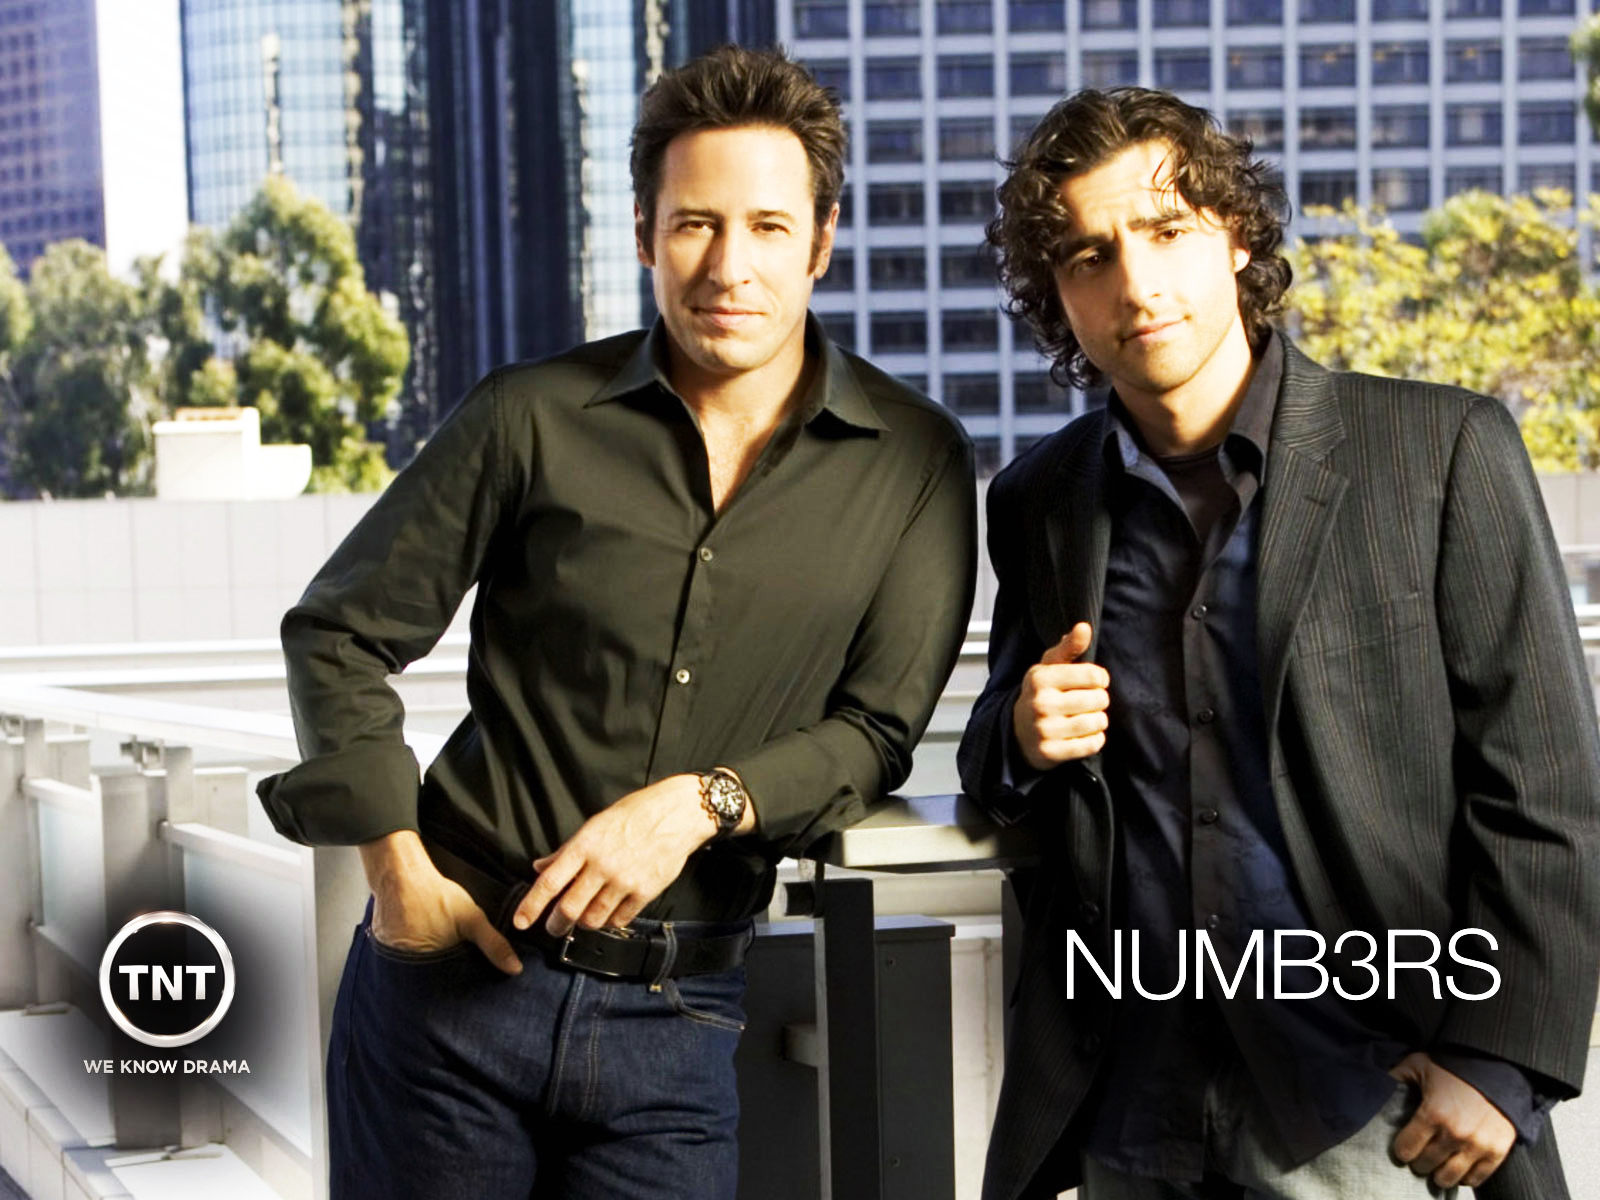 Numb3rs Posters Tv Series